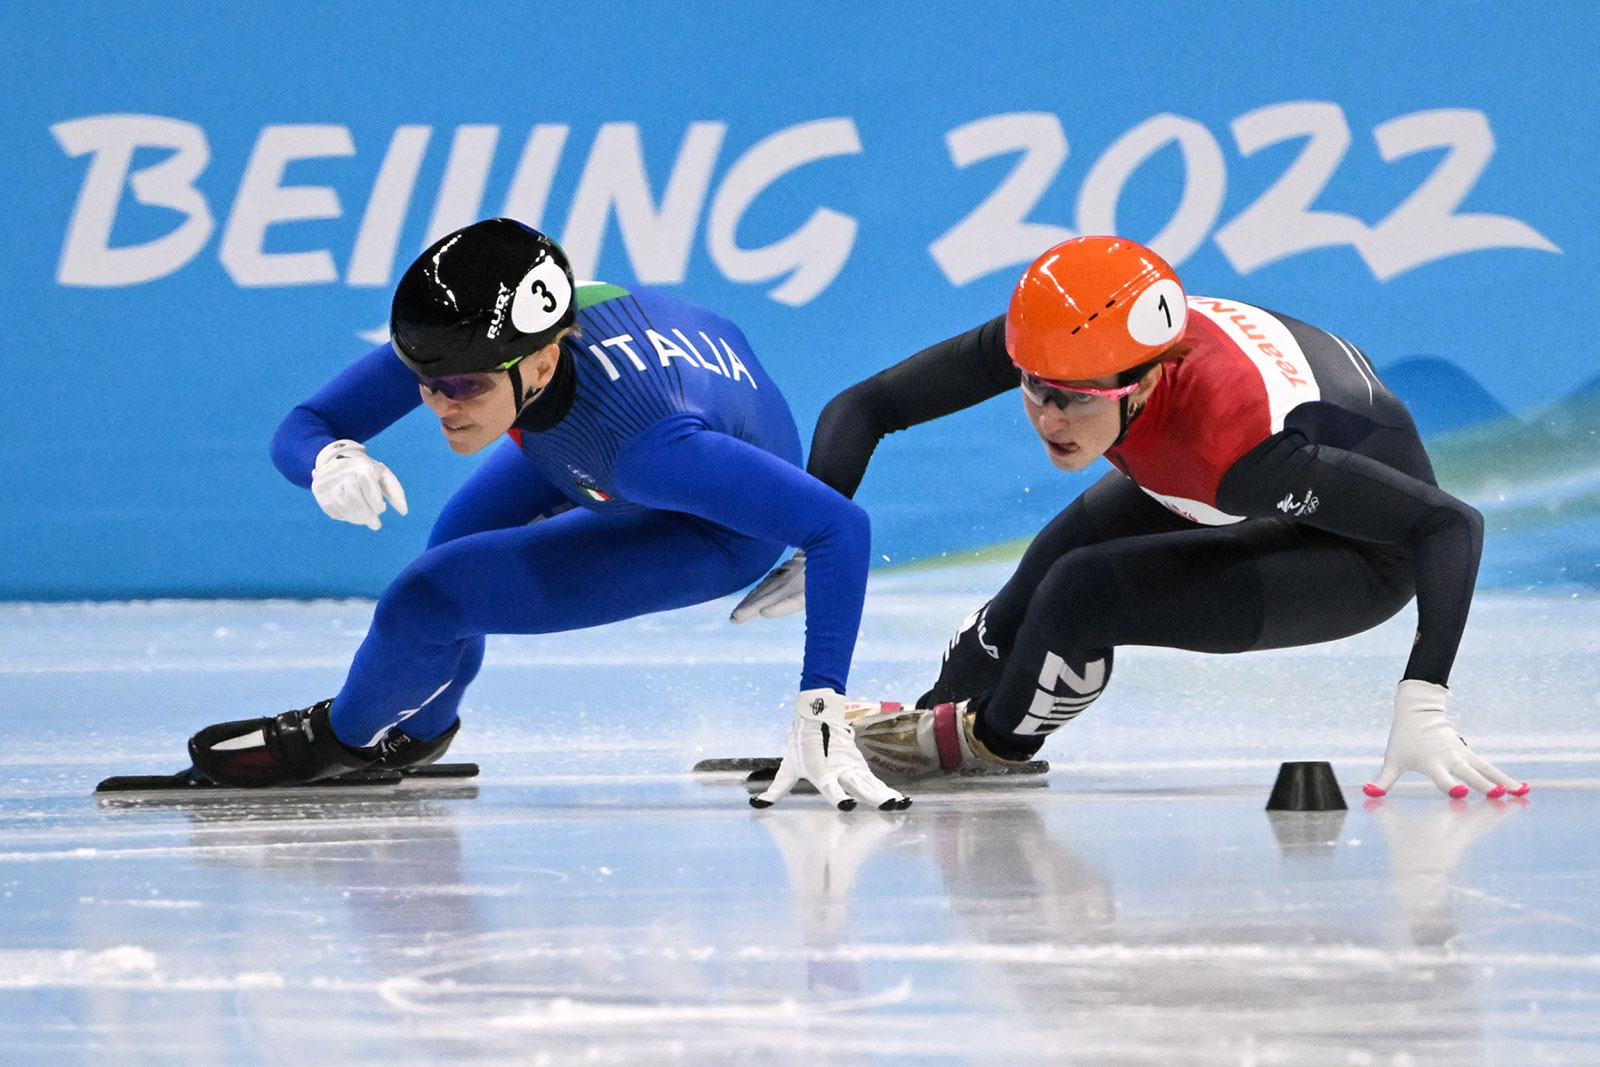 From left, Italy's Arianna Fontana and Suzanne Schulting of the Netherlands compete in the women's 500m short track speed skating event on February 7.